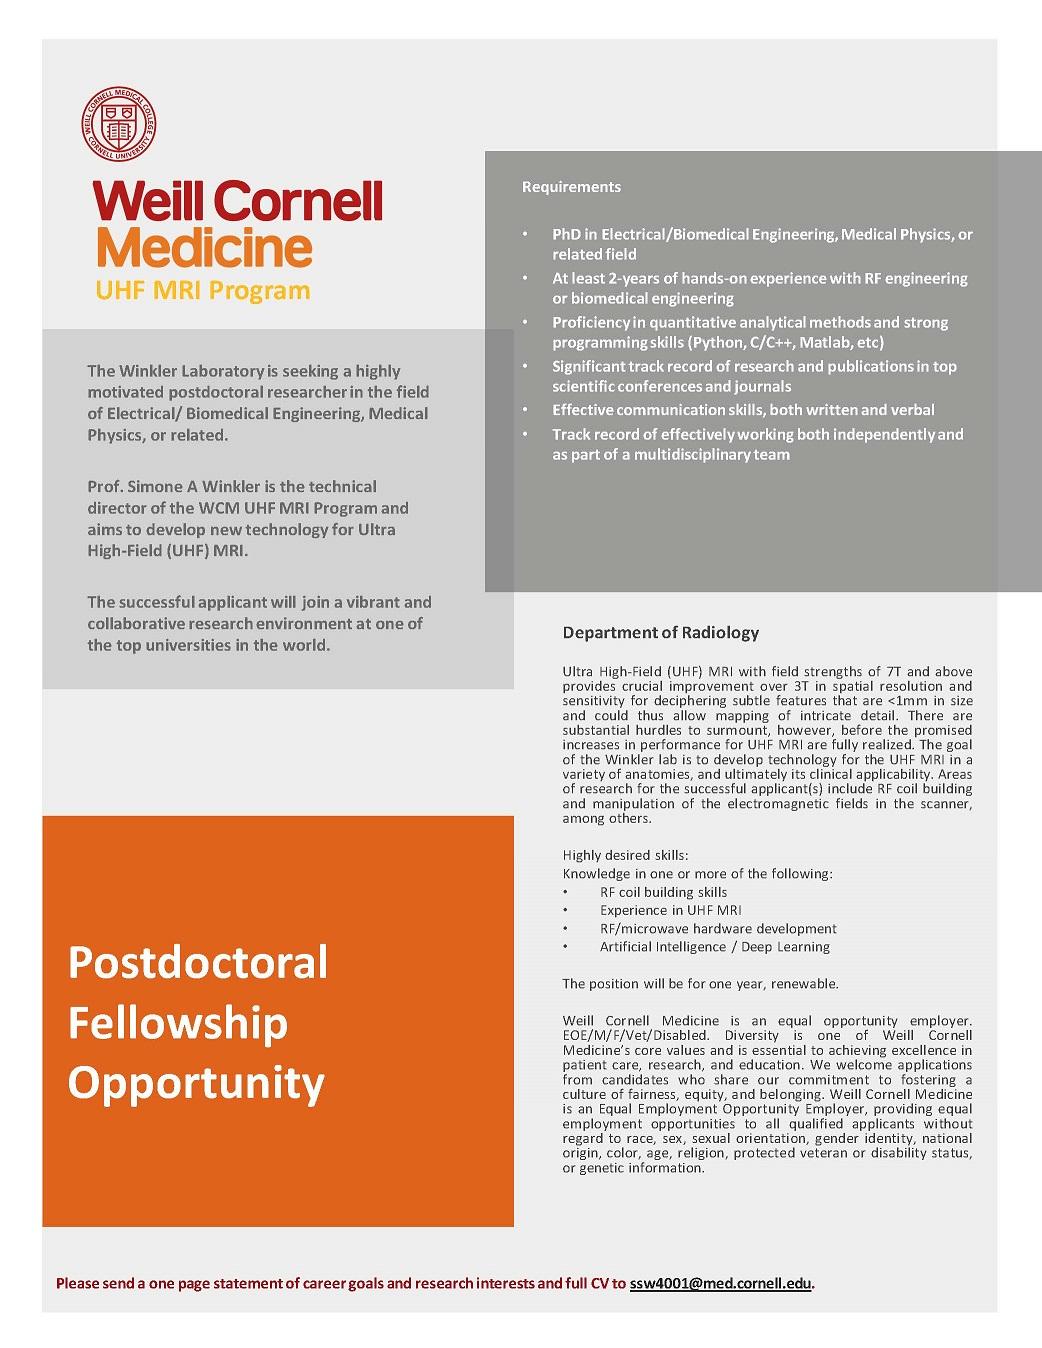 Postdoctoral Fellowship Opportunity